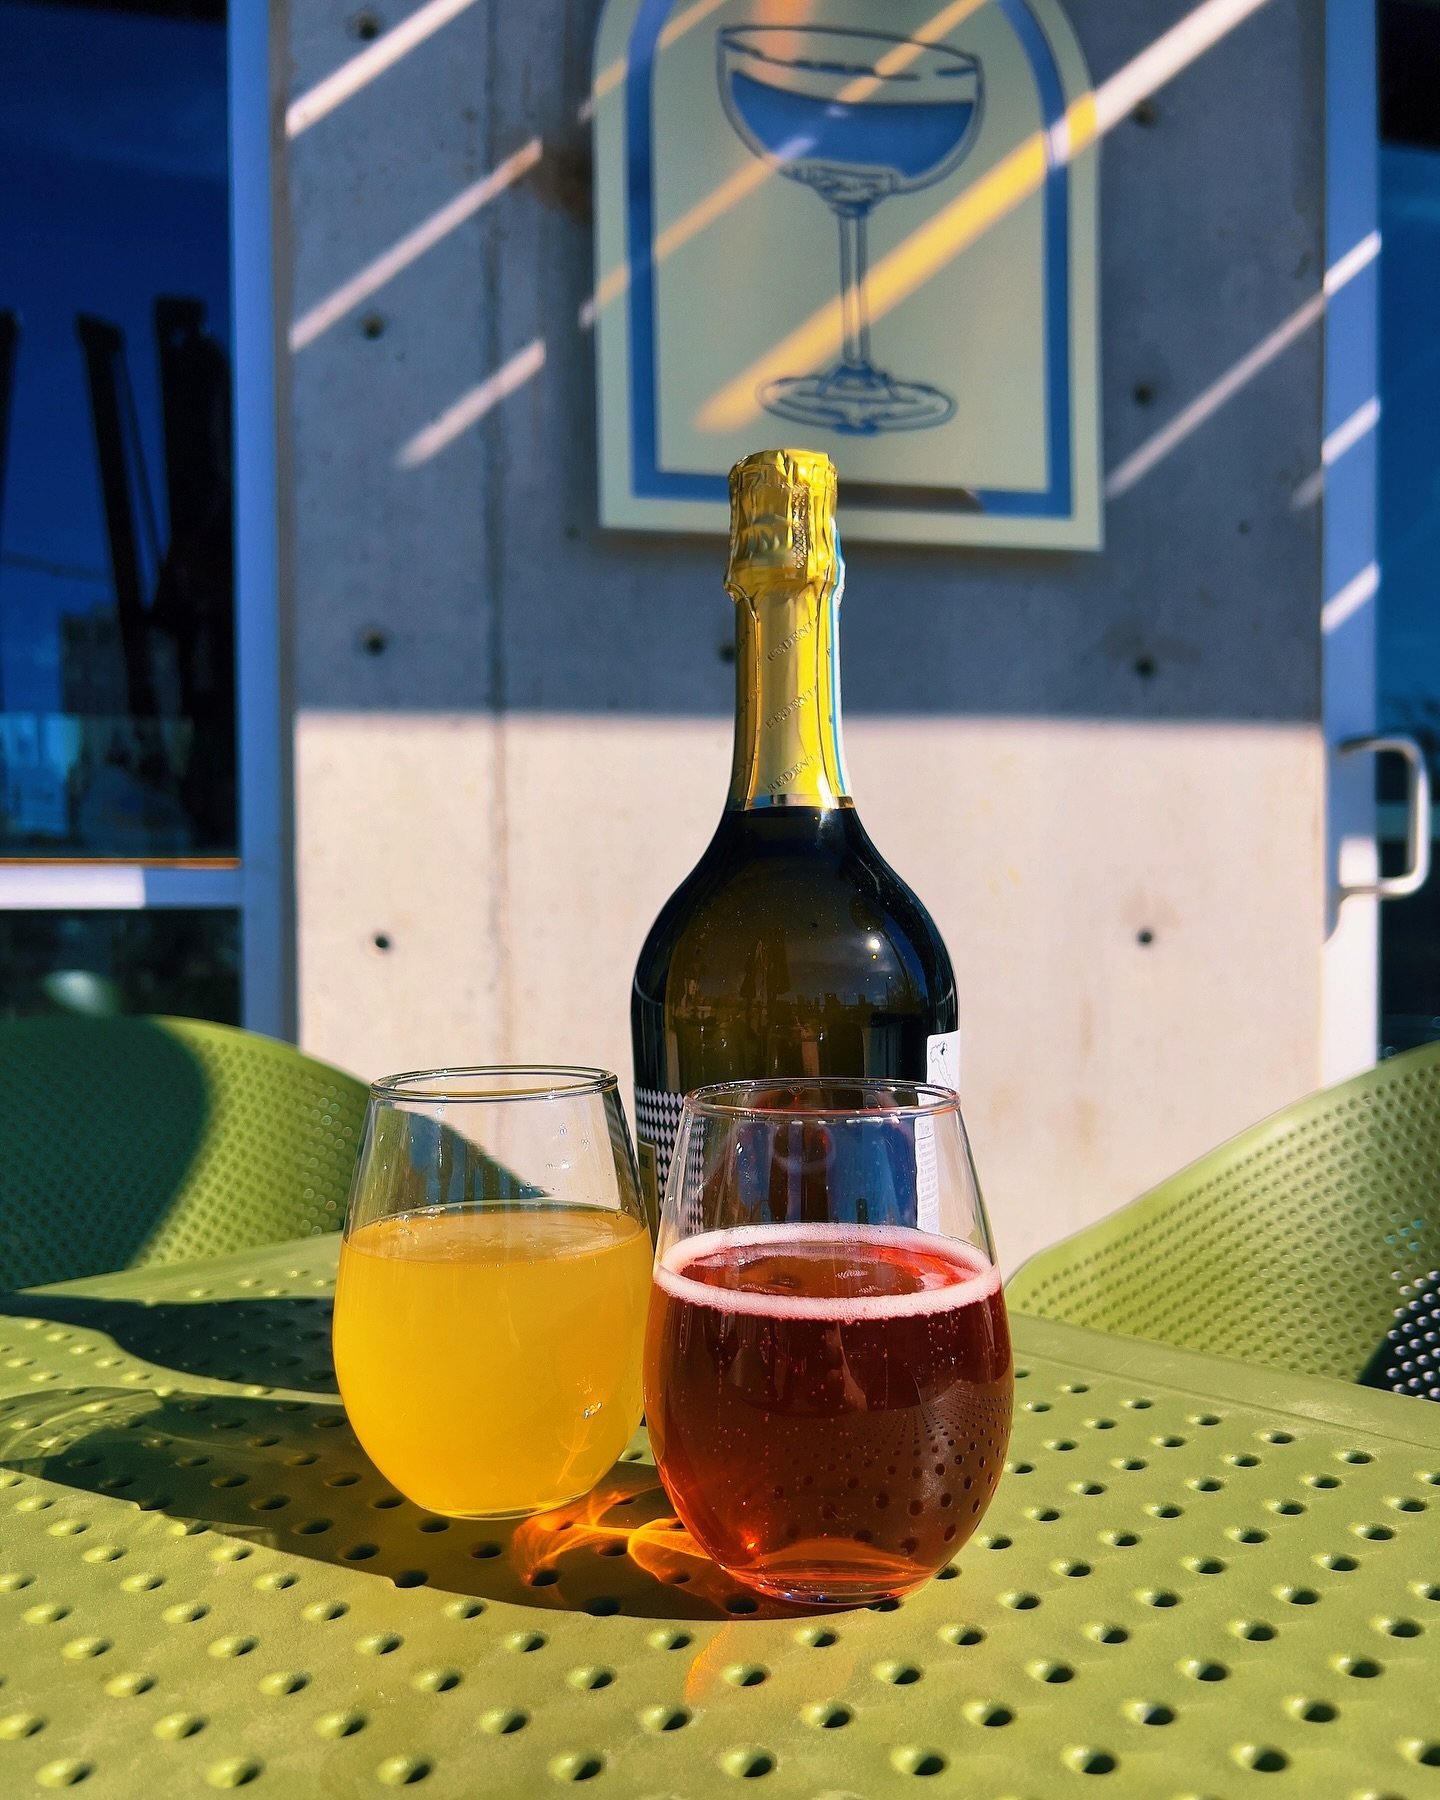 Wake up, it&rsquo;s time for brunch!! 🍾🌞 It&rsquo;s going to be 76&deg; and sunny today, enjoy it with a bottle of mimosas on our patio with your friends.